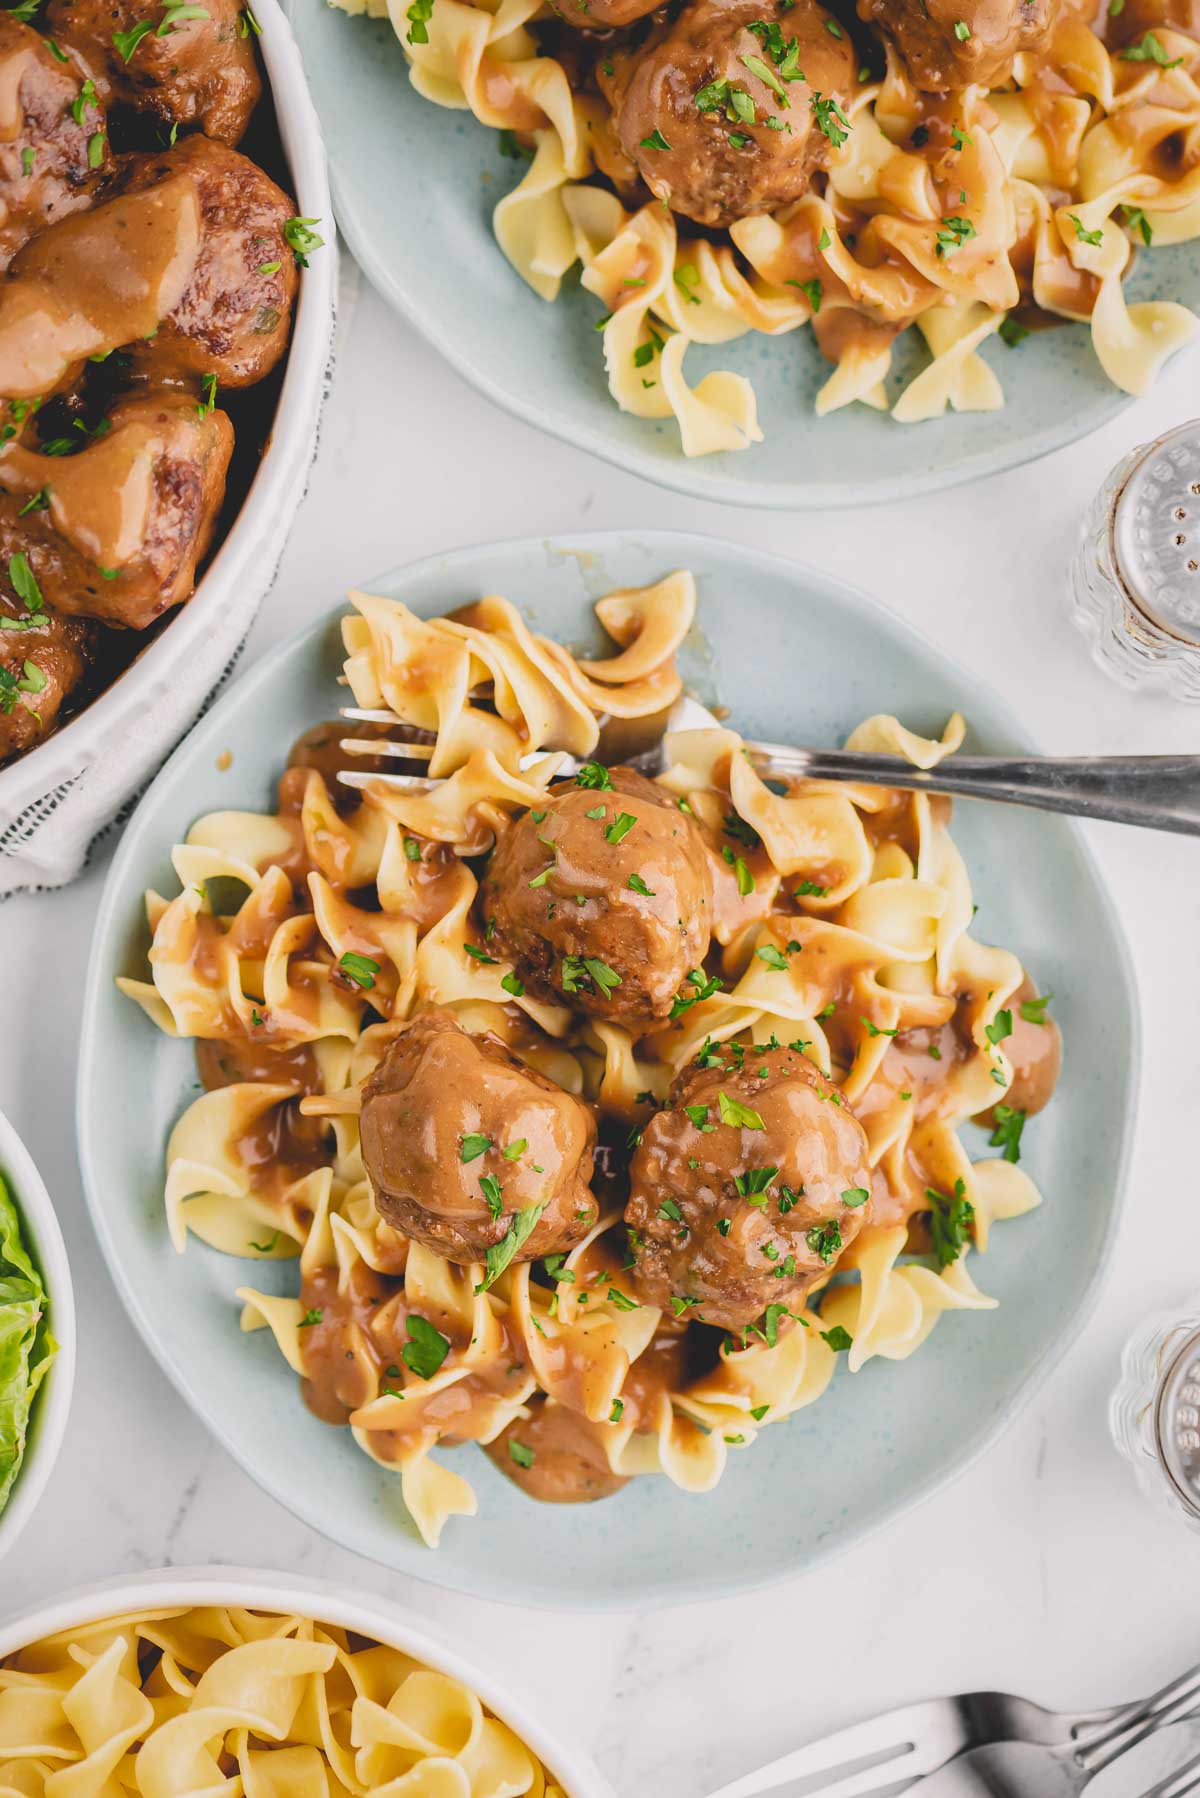 Swedish meatballs over a bed of noodles.